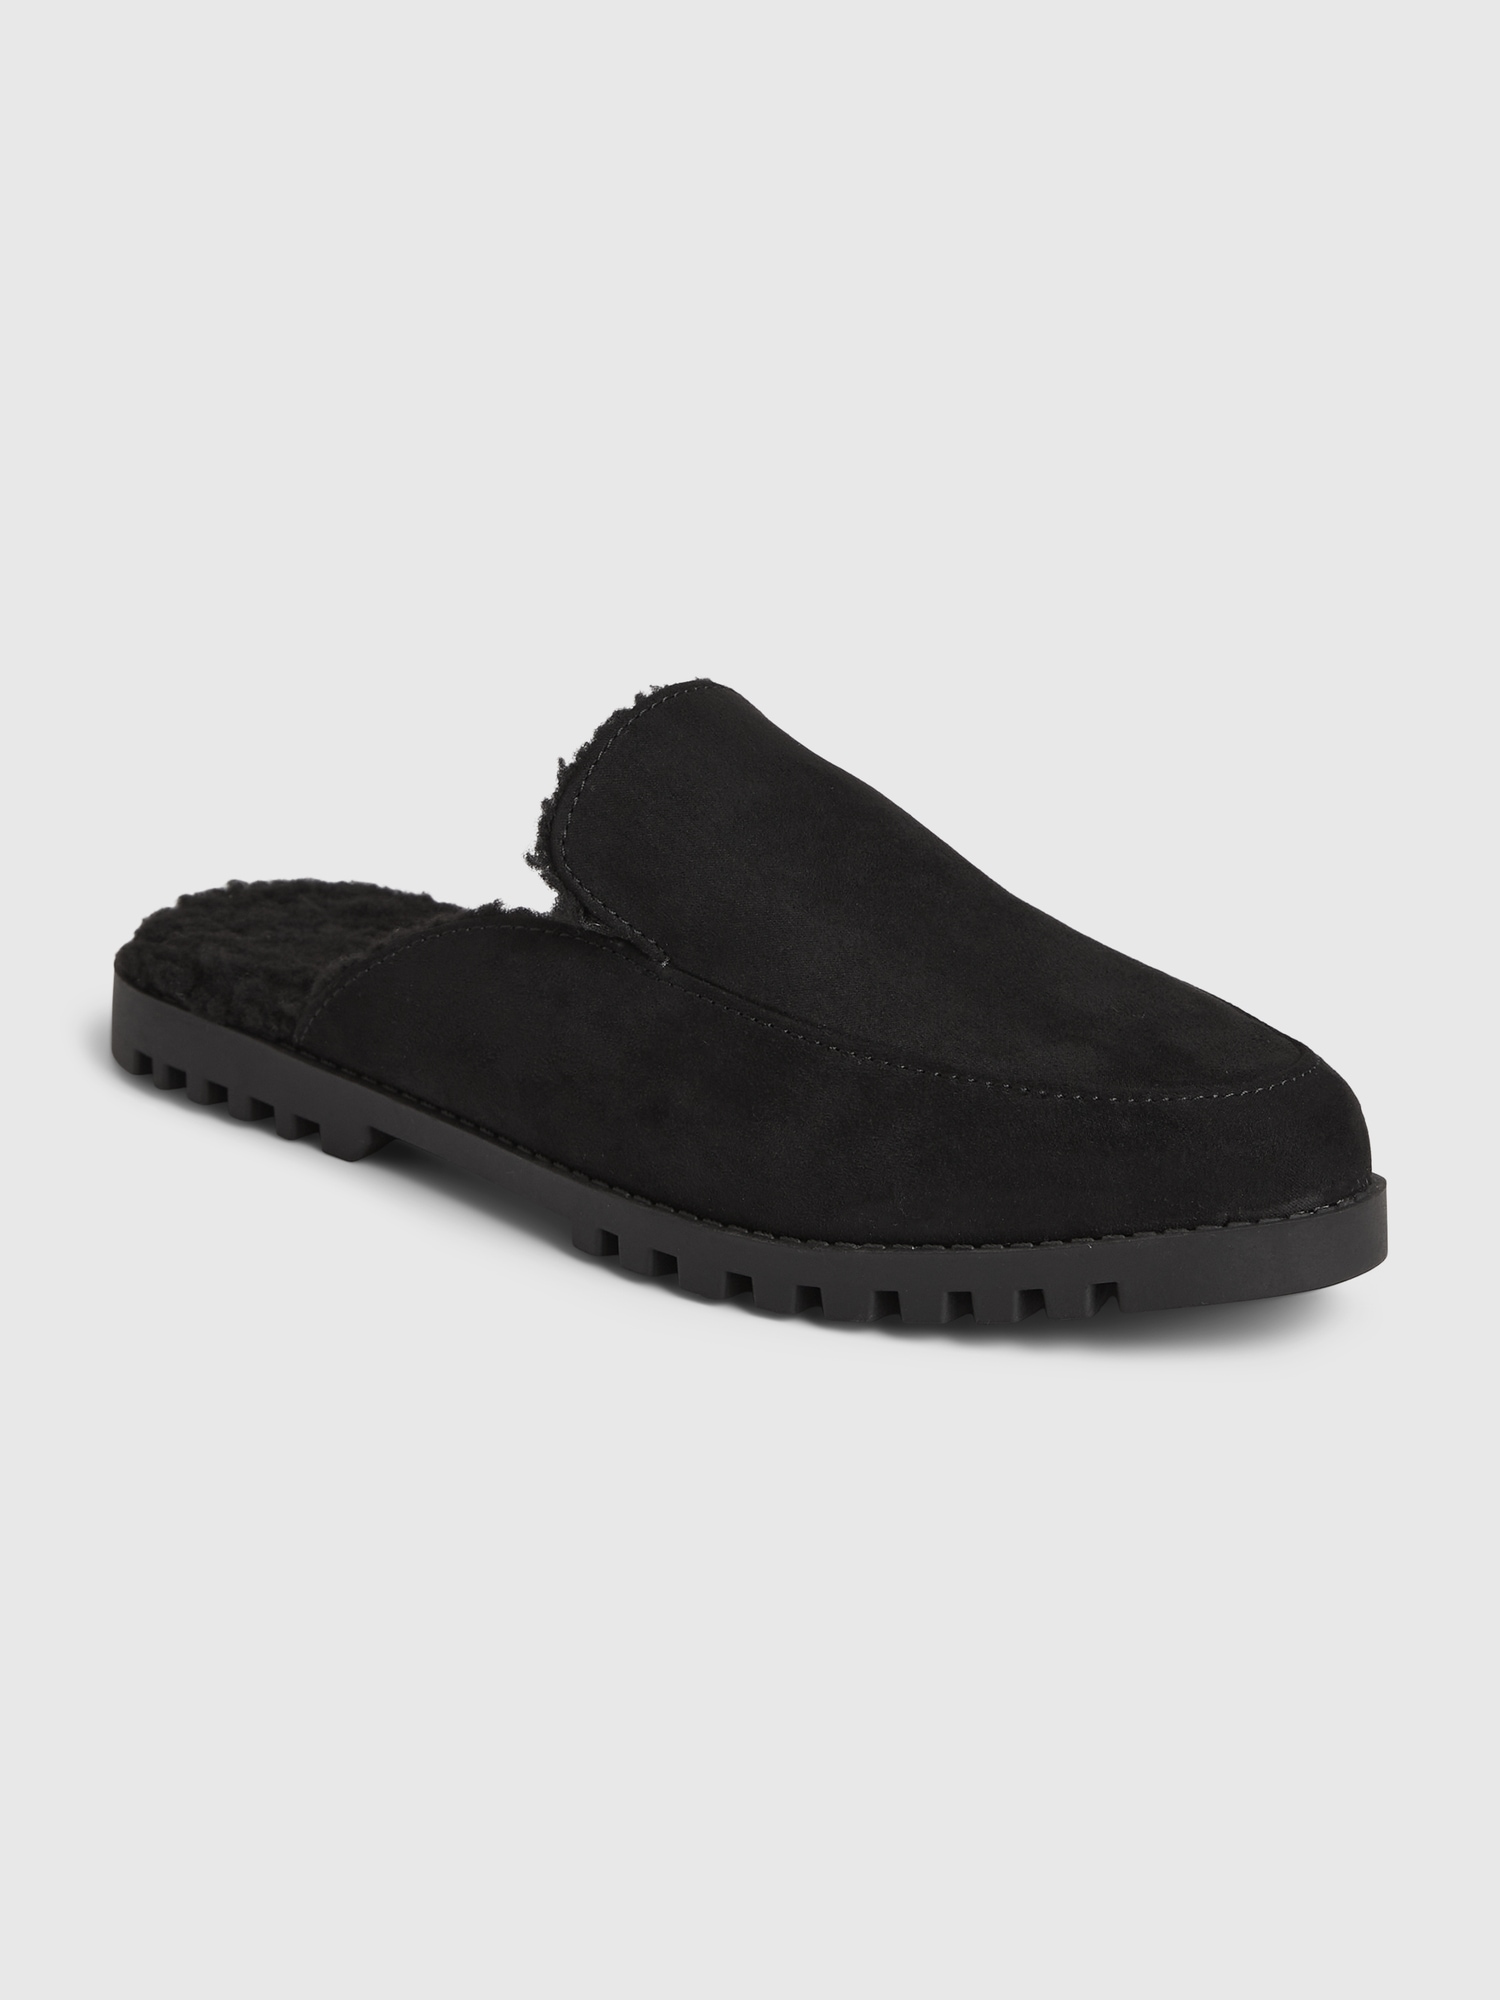 Gap Faux Shearling Loafer Mules black. 1